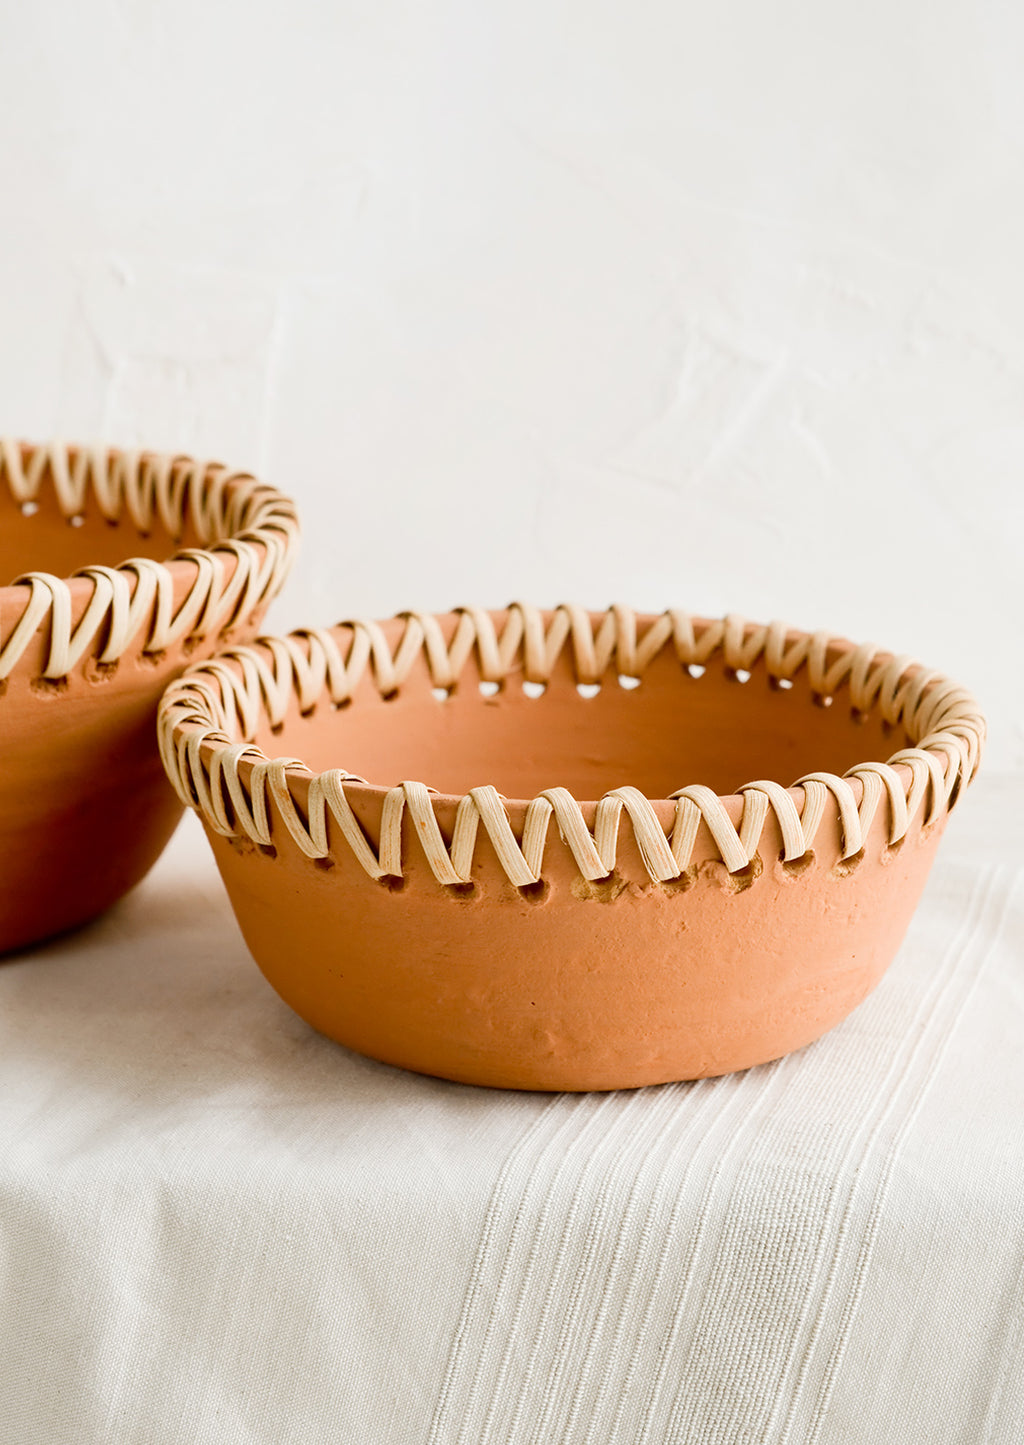 1: Terracotta bowl with decorative woven seagrass trim around top.